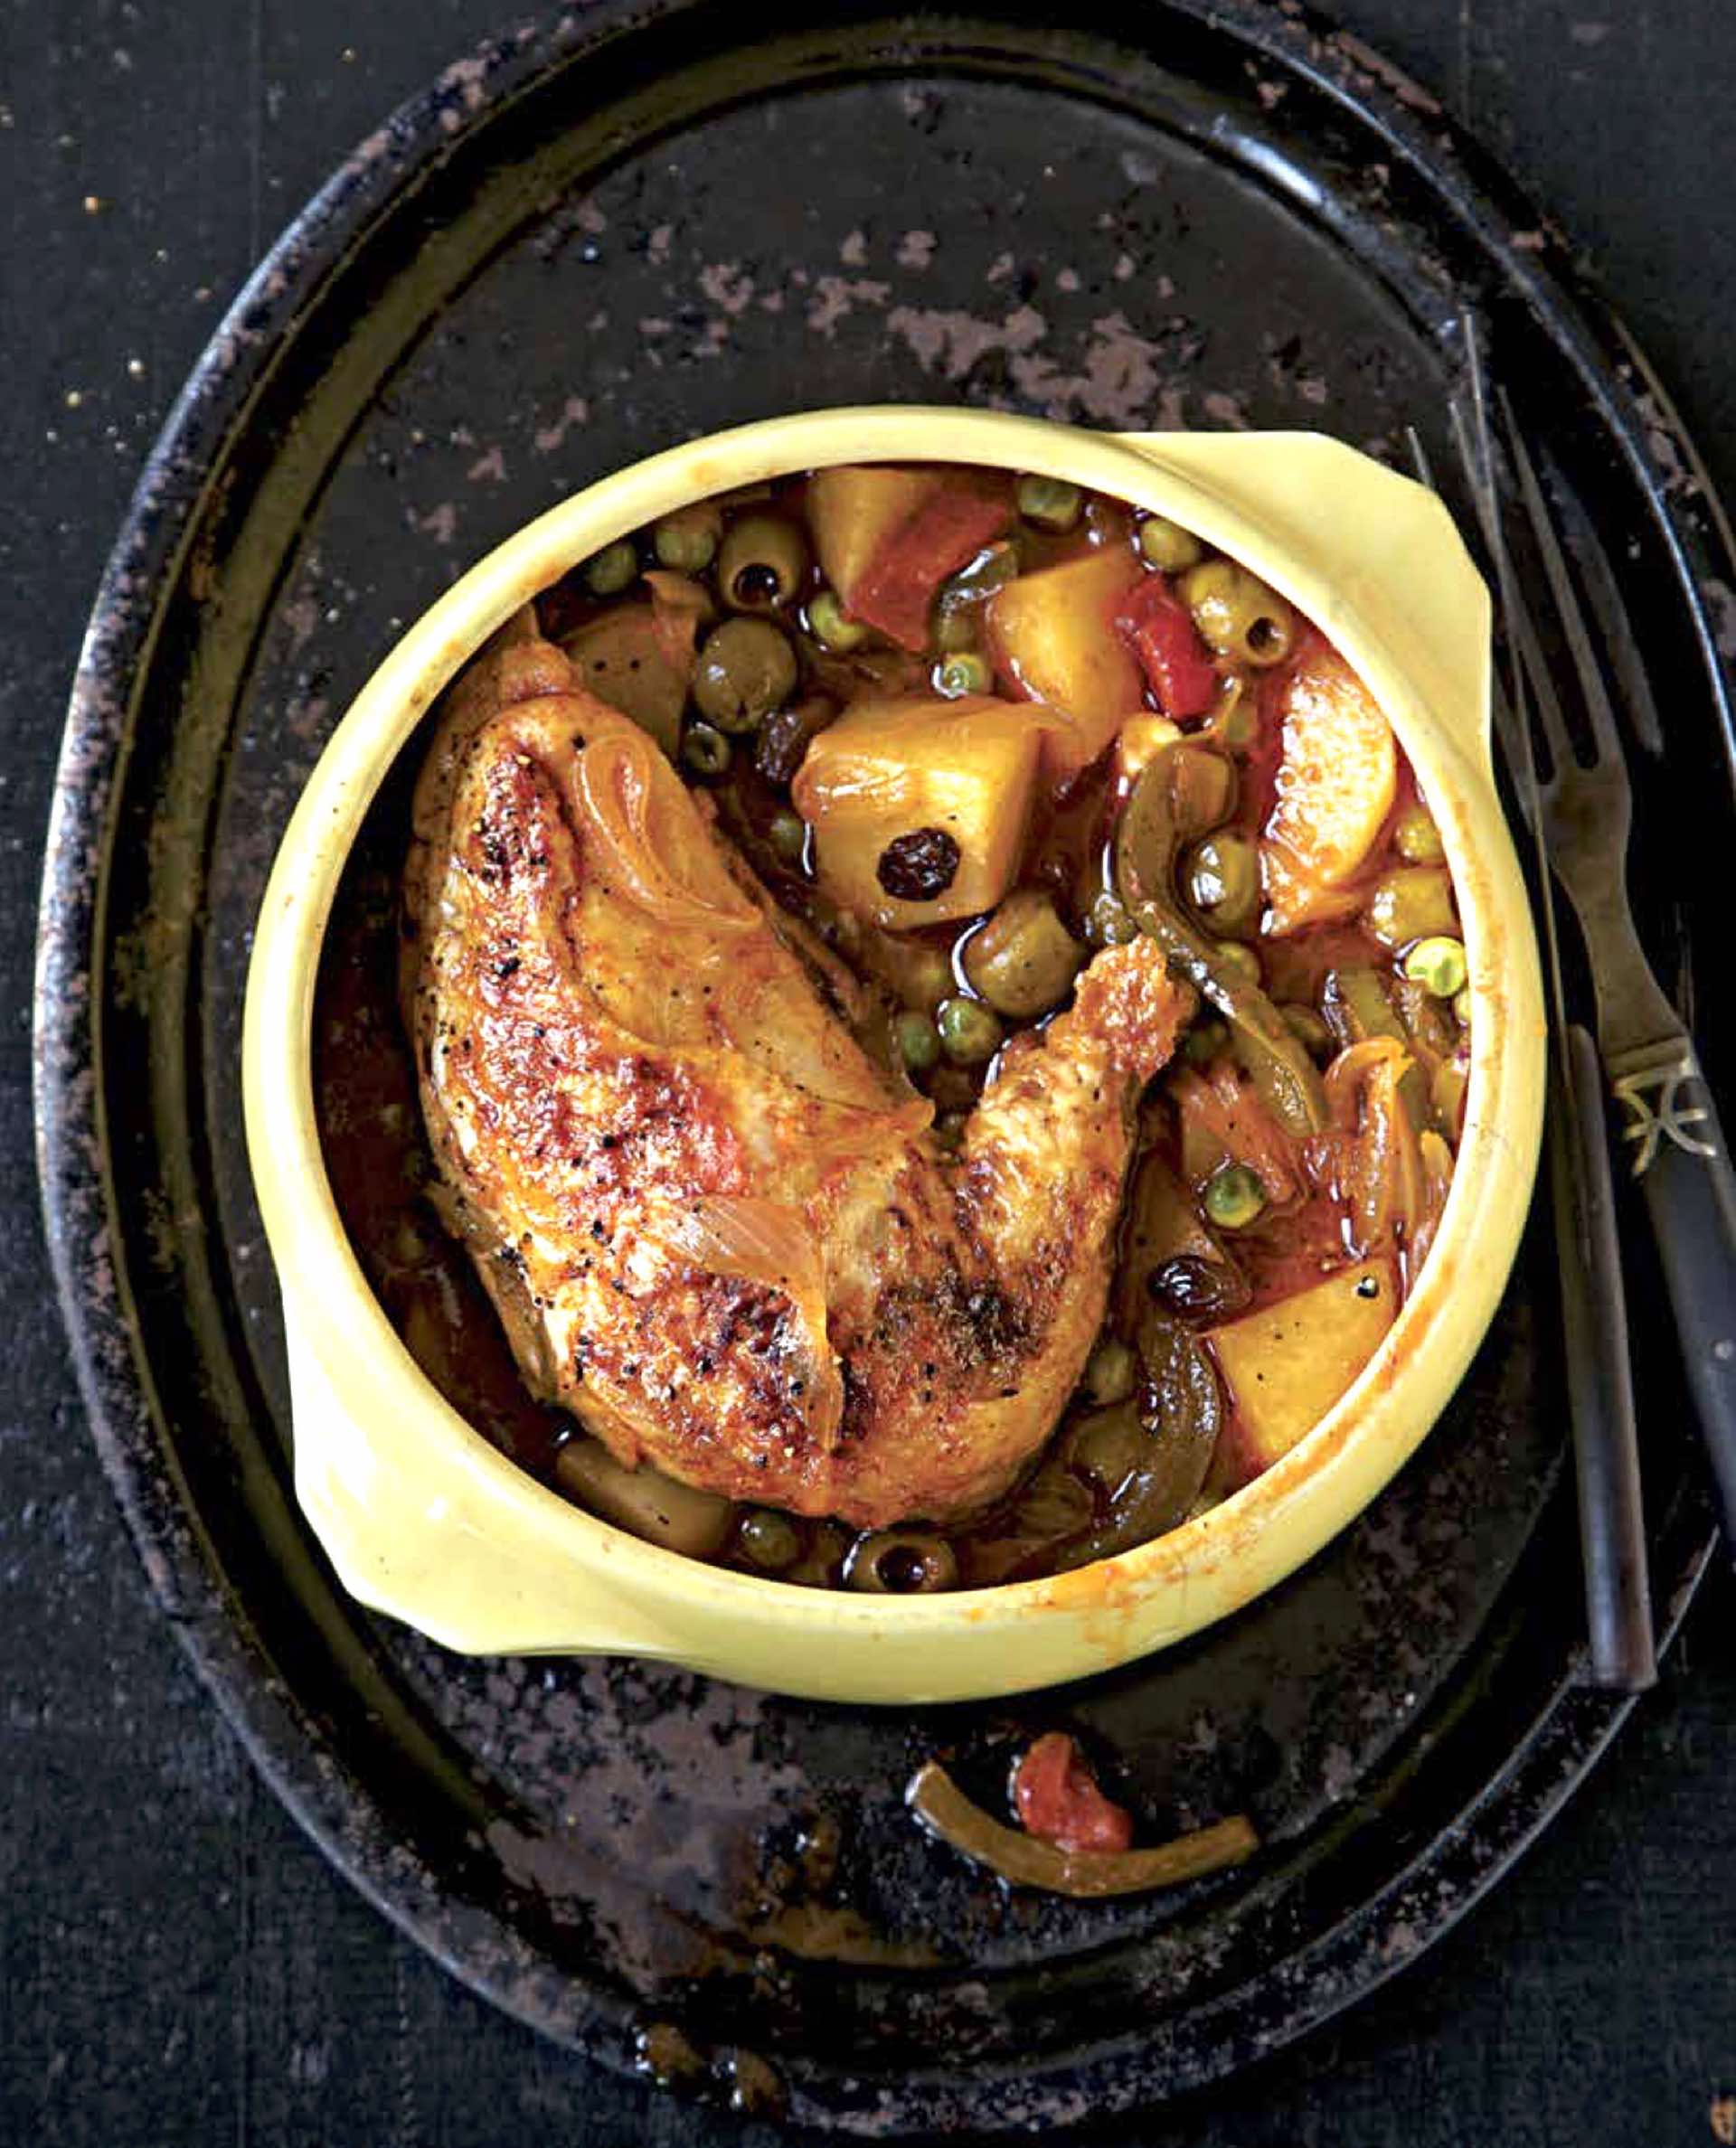 A mix of lime juice, orange juice, dry white wine and raisins add depth of flavor to the savory Cuban-Style Chicken Stew. (Photo by Weldon Owen)